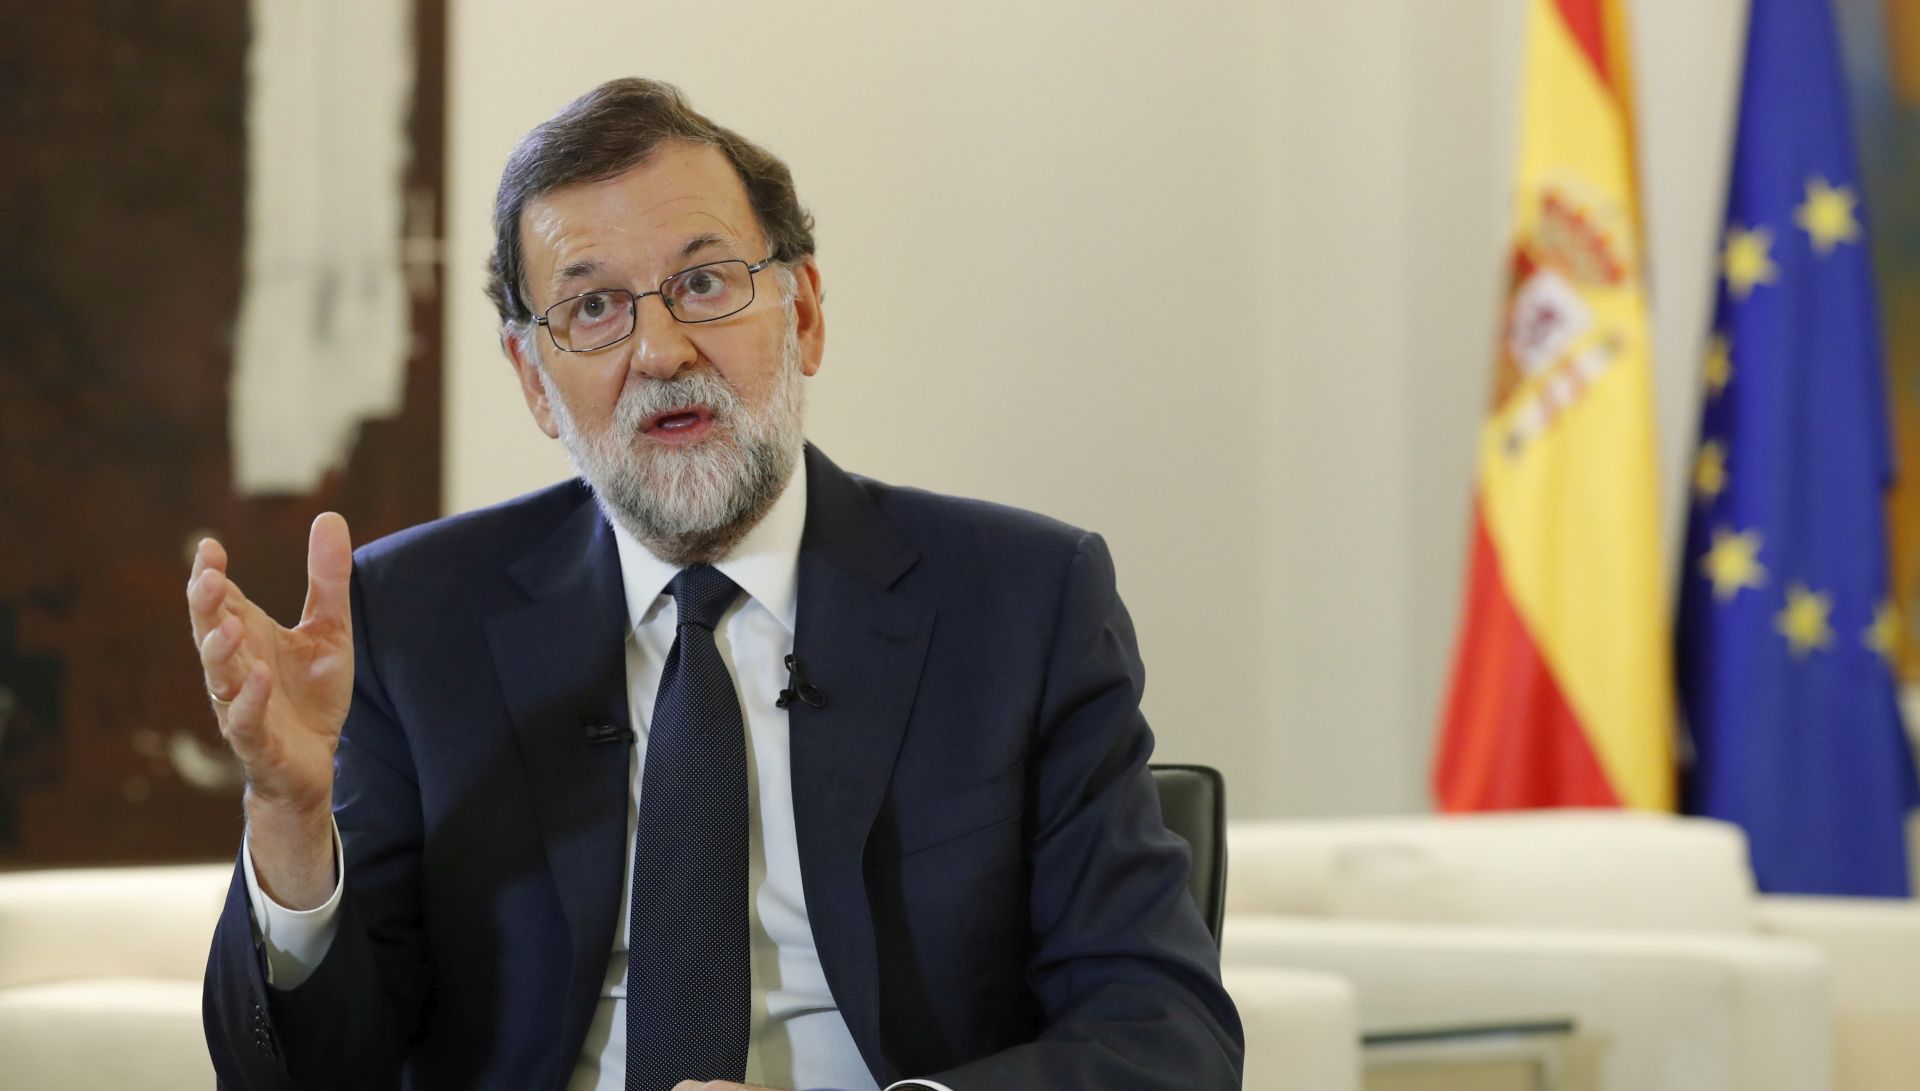 epa06246182 Spanish Prime Minister Mariano Rajoy gestures while speaking during an interview with Spanish News Agency Agencia EFE, at the La Moncloa Palace in Madrid, Spain, 05 October 2017. Rajoy demanded Catalonian regional Government President Carles Puigdemont to cancel his project of making an unilateral Independence declaration of the region 'as soon as possible'.  EPA/ANGEL DIAZ